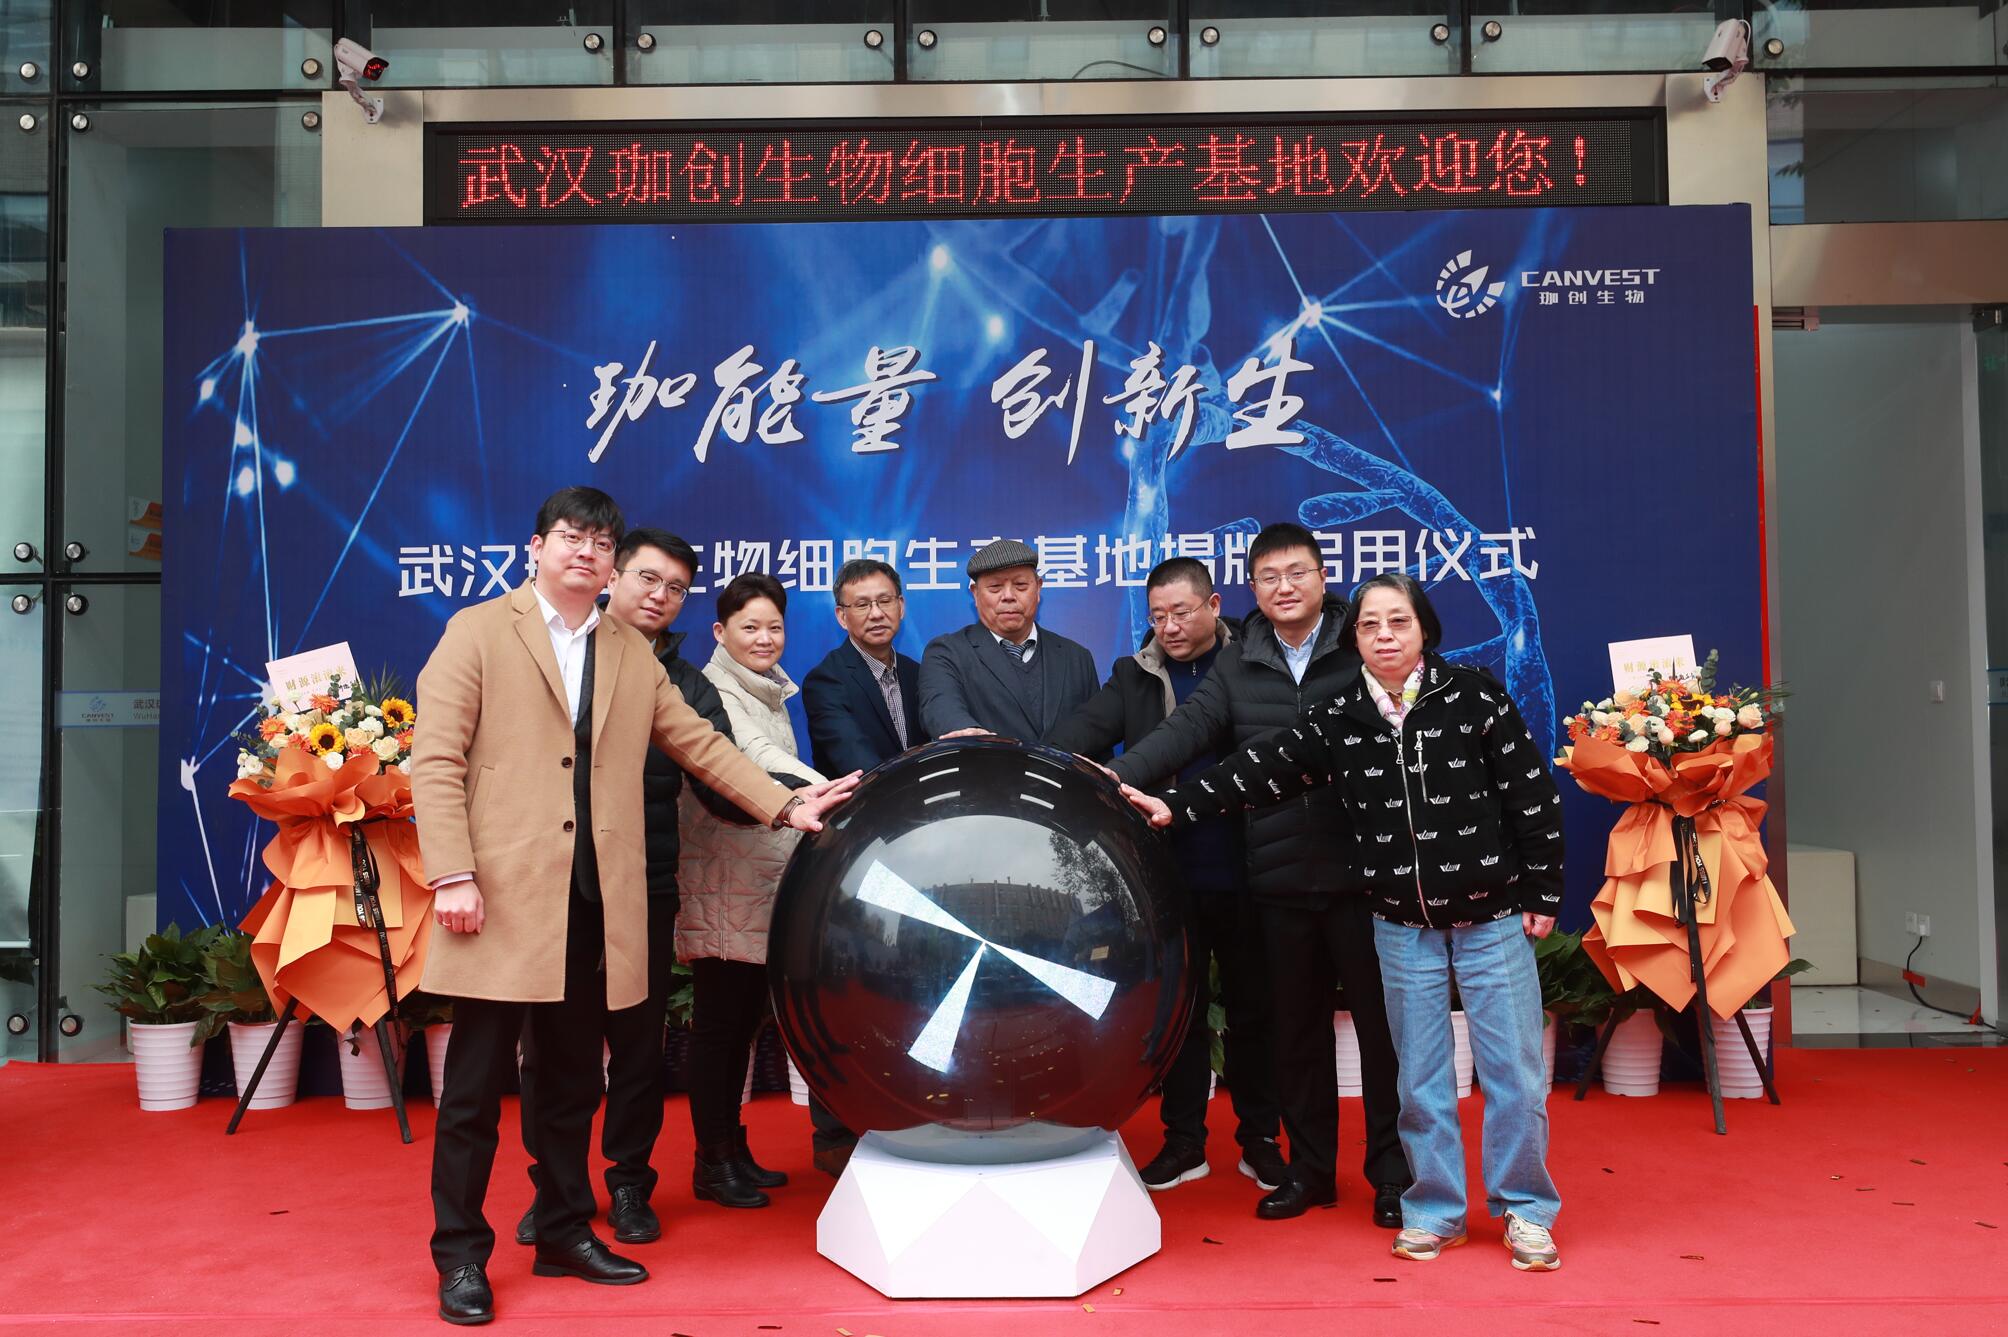 The unveiling ceremony of Wuhan Jiachang biological Cell Production Base was successfully held